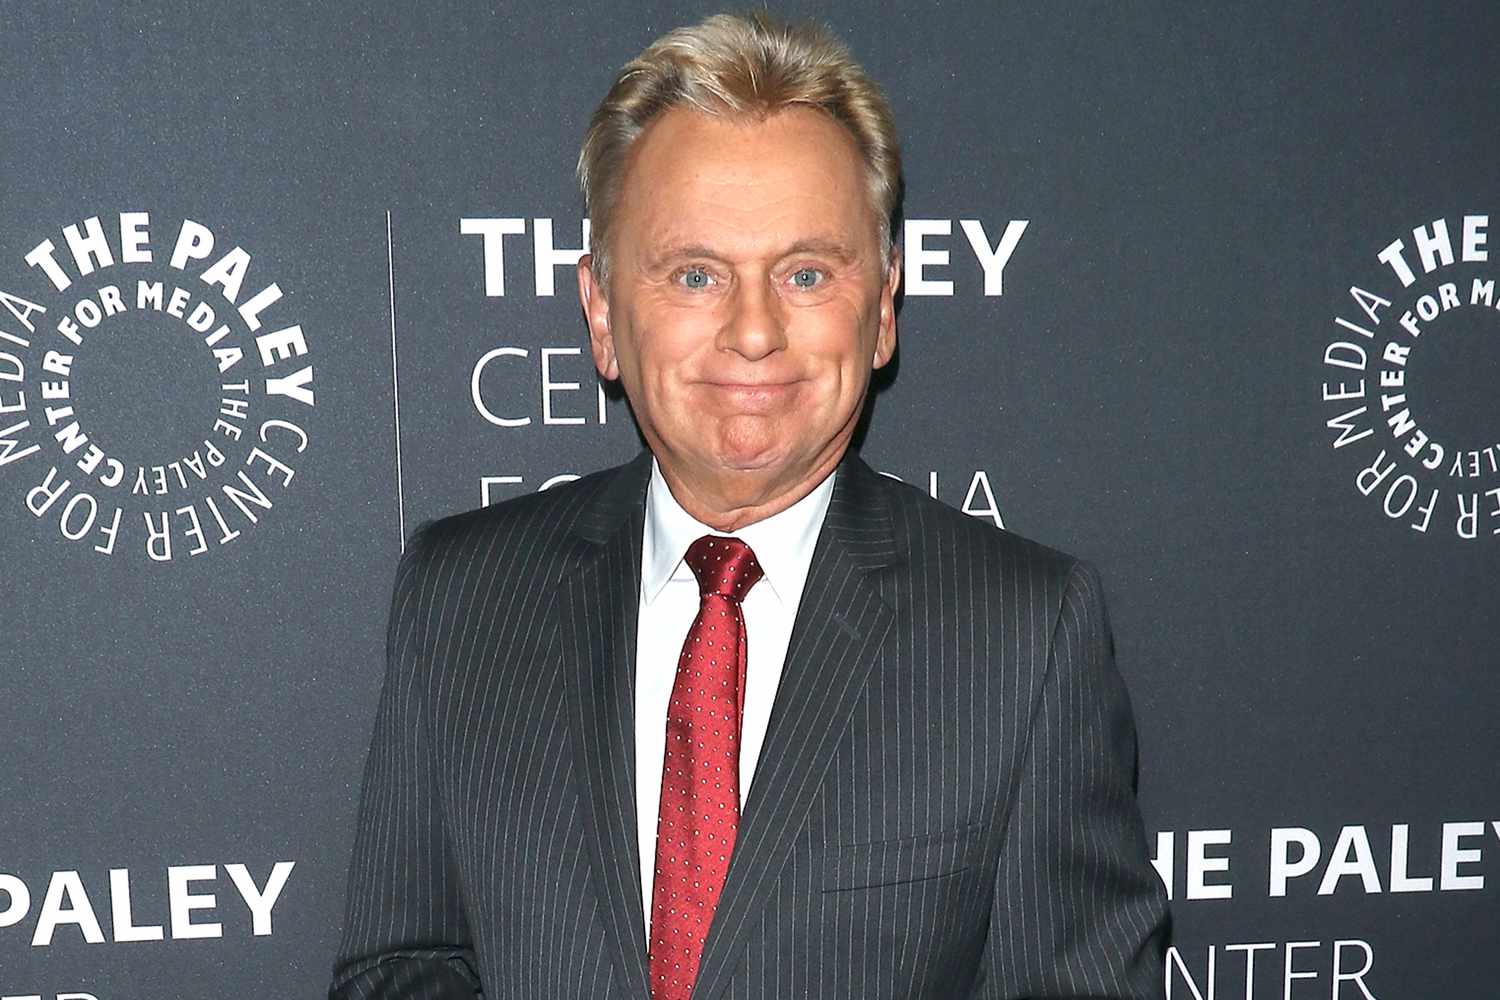 The Shocking Transformation Of Pat Sajak: You Won’t Believe When He Started Wearing A Wig!